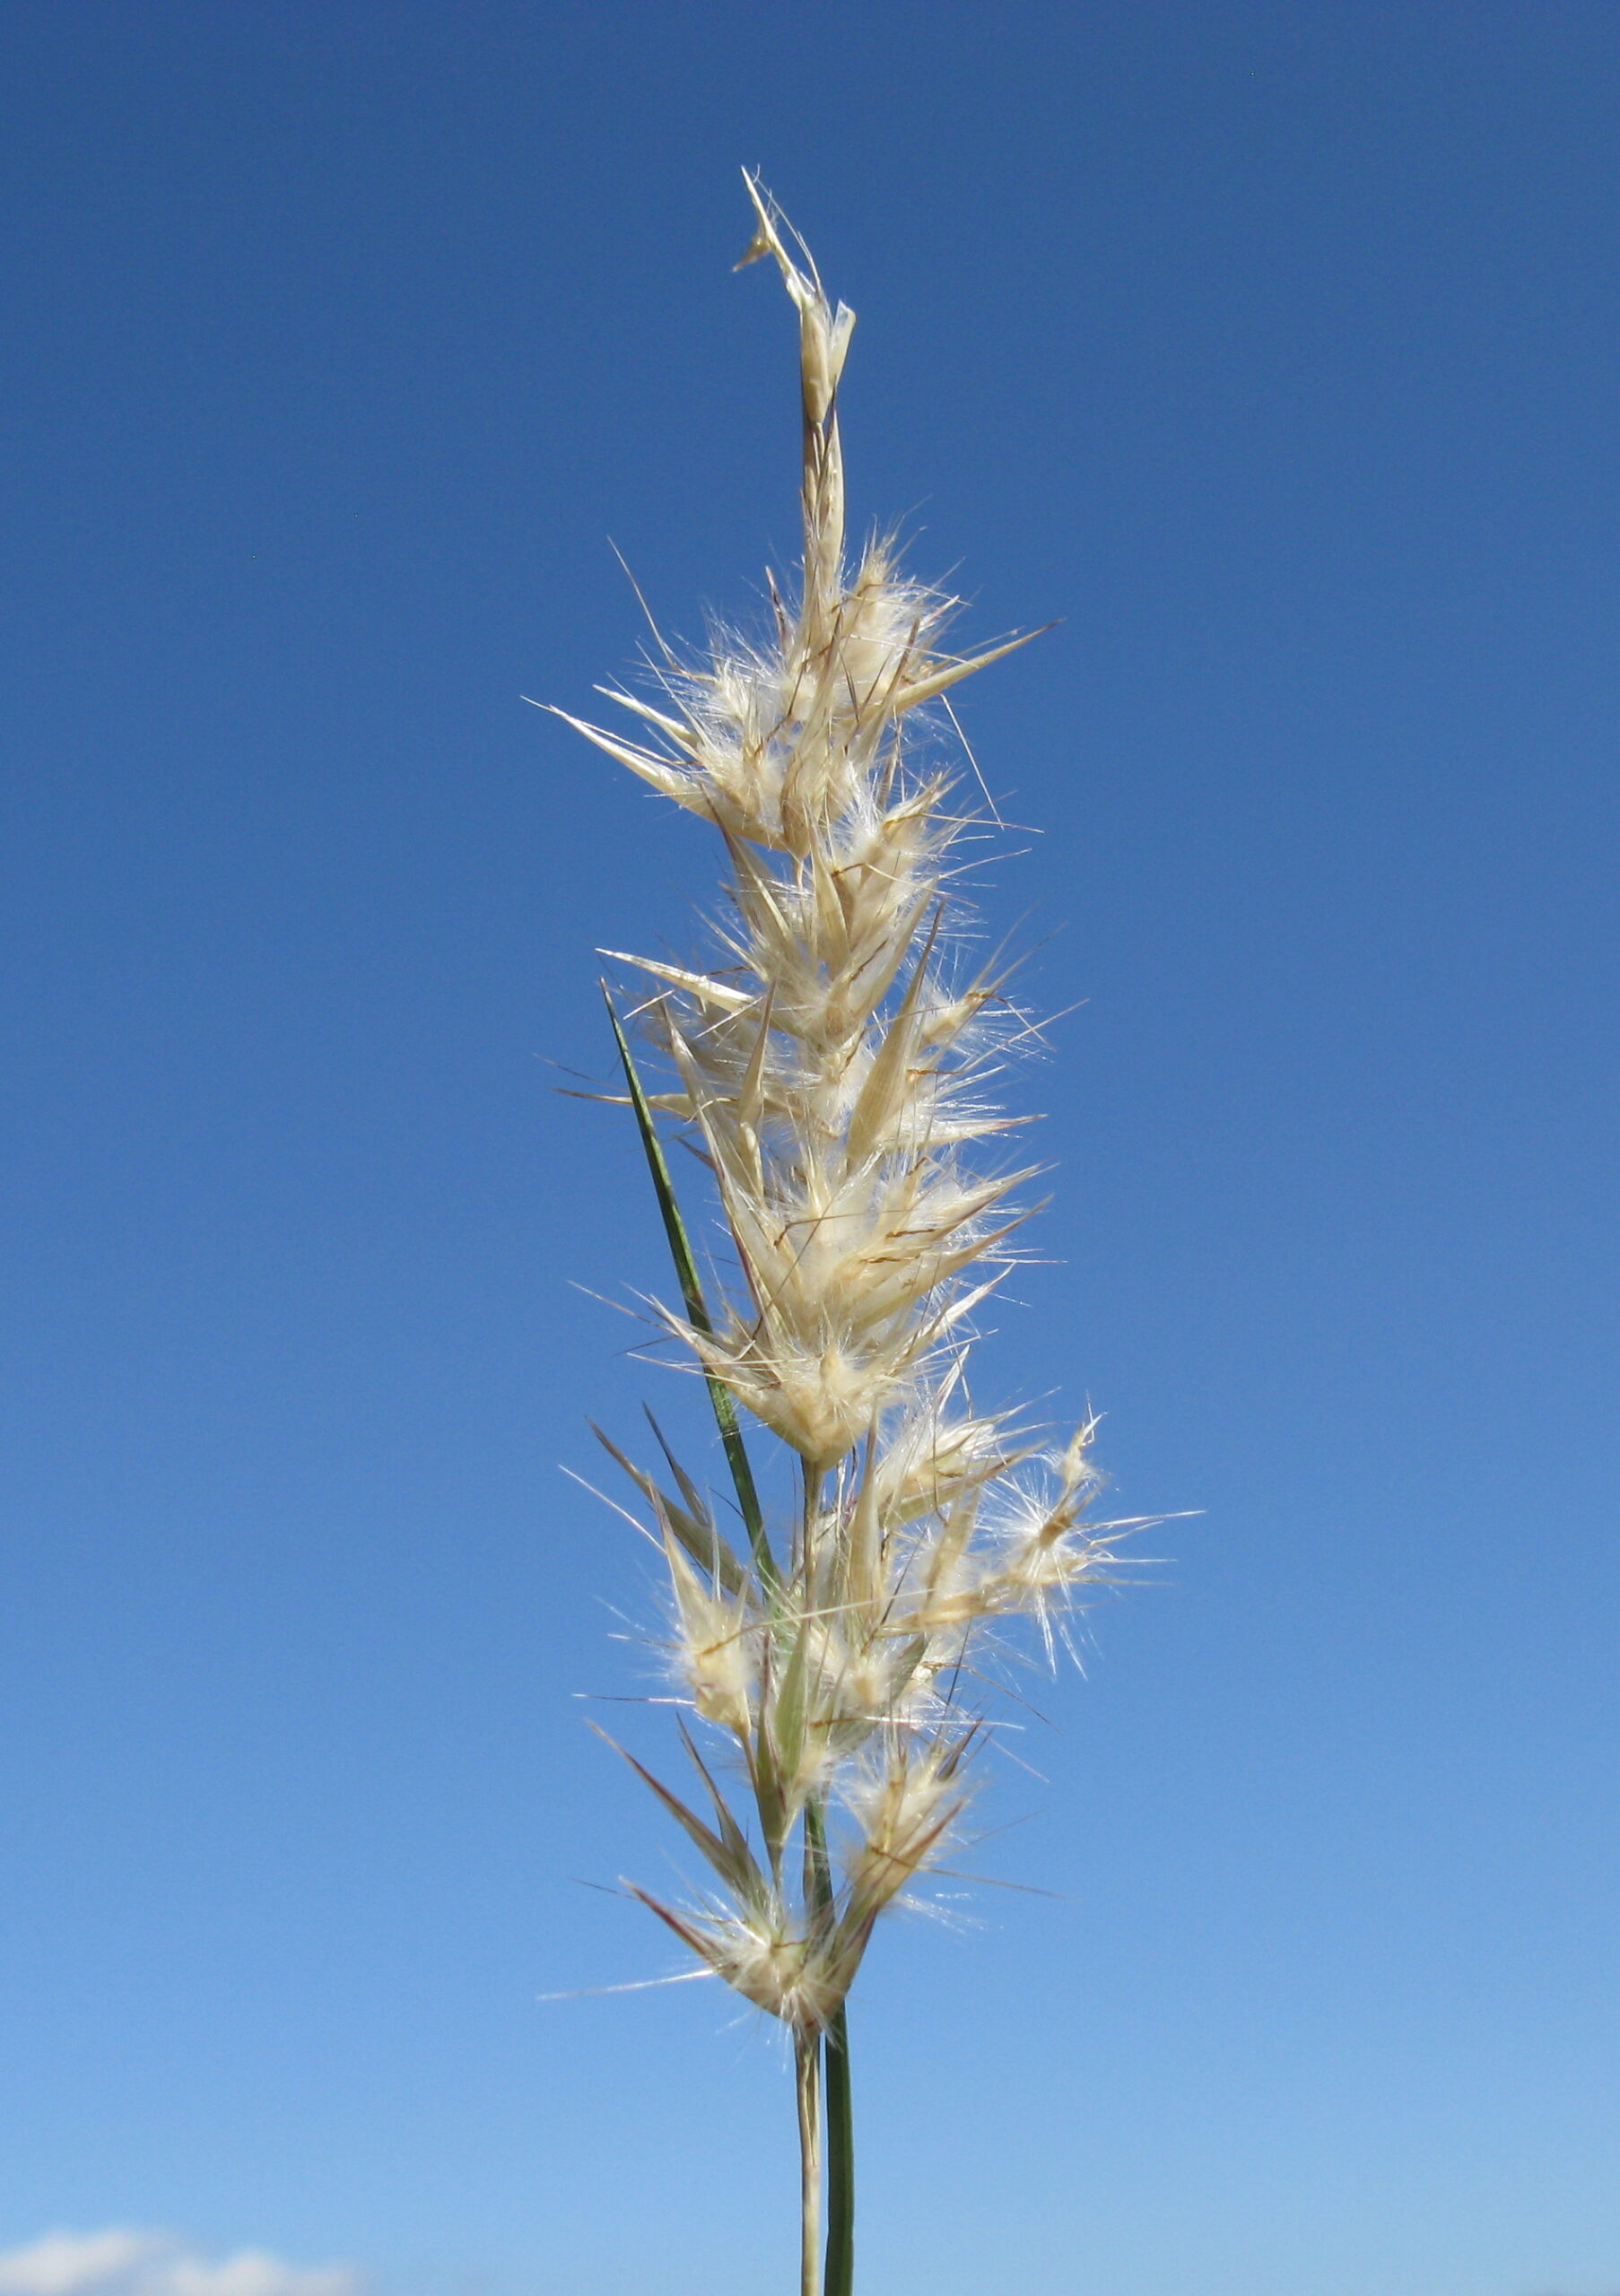 Photograph of the inflorescence of purplish wallaby-grass showing hairy spikelets.